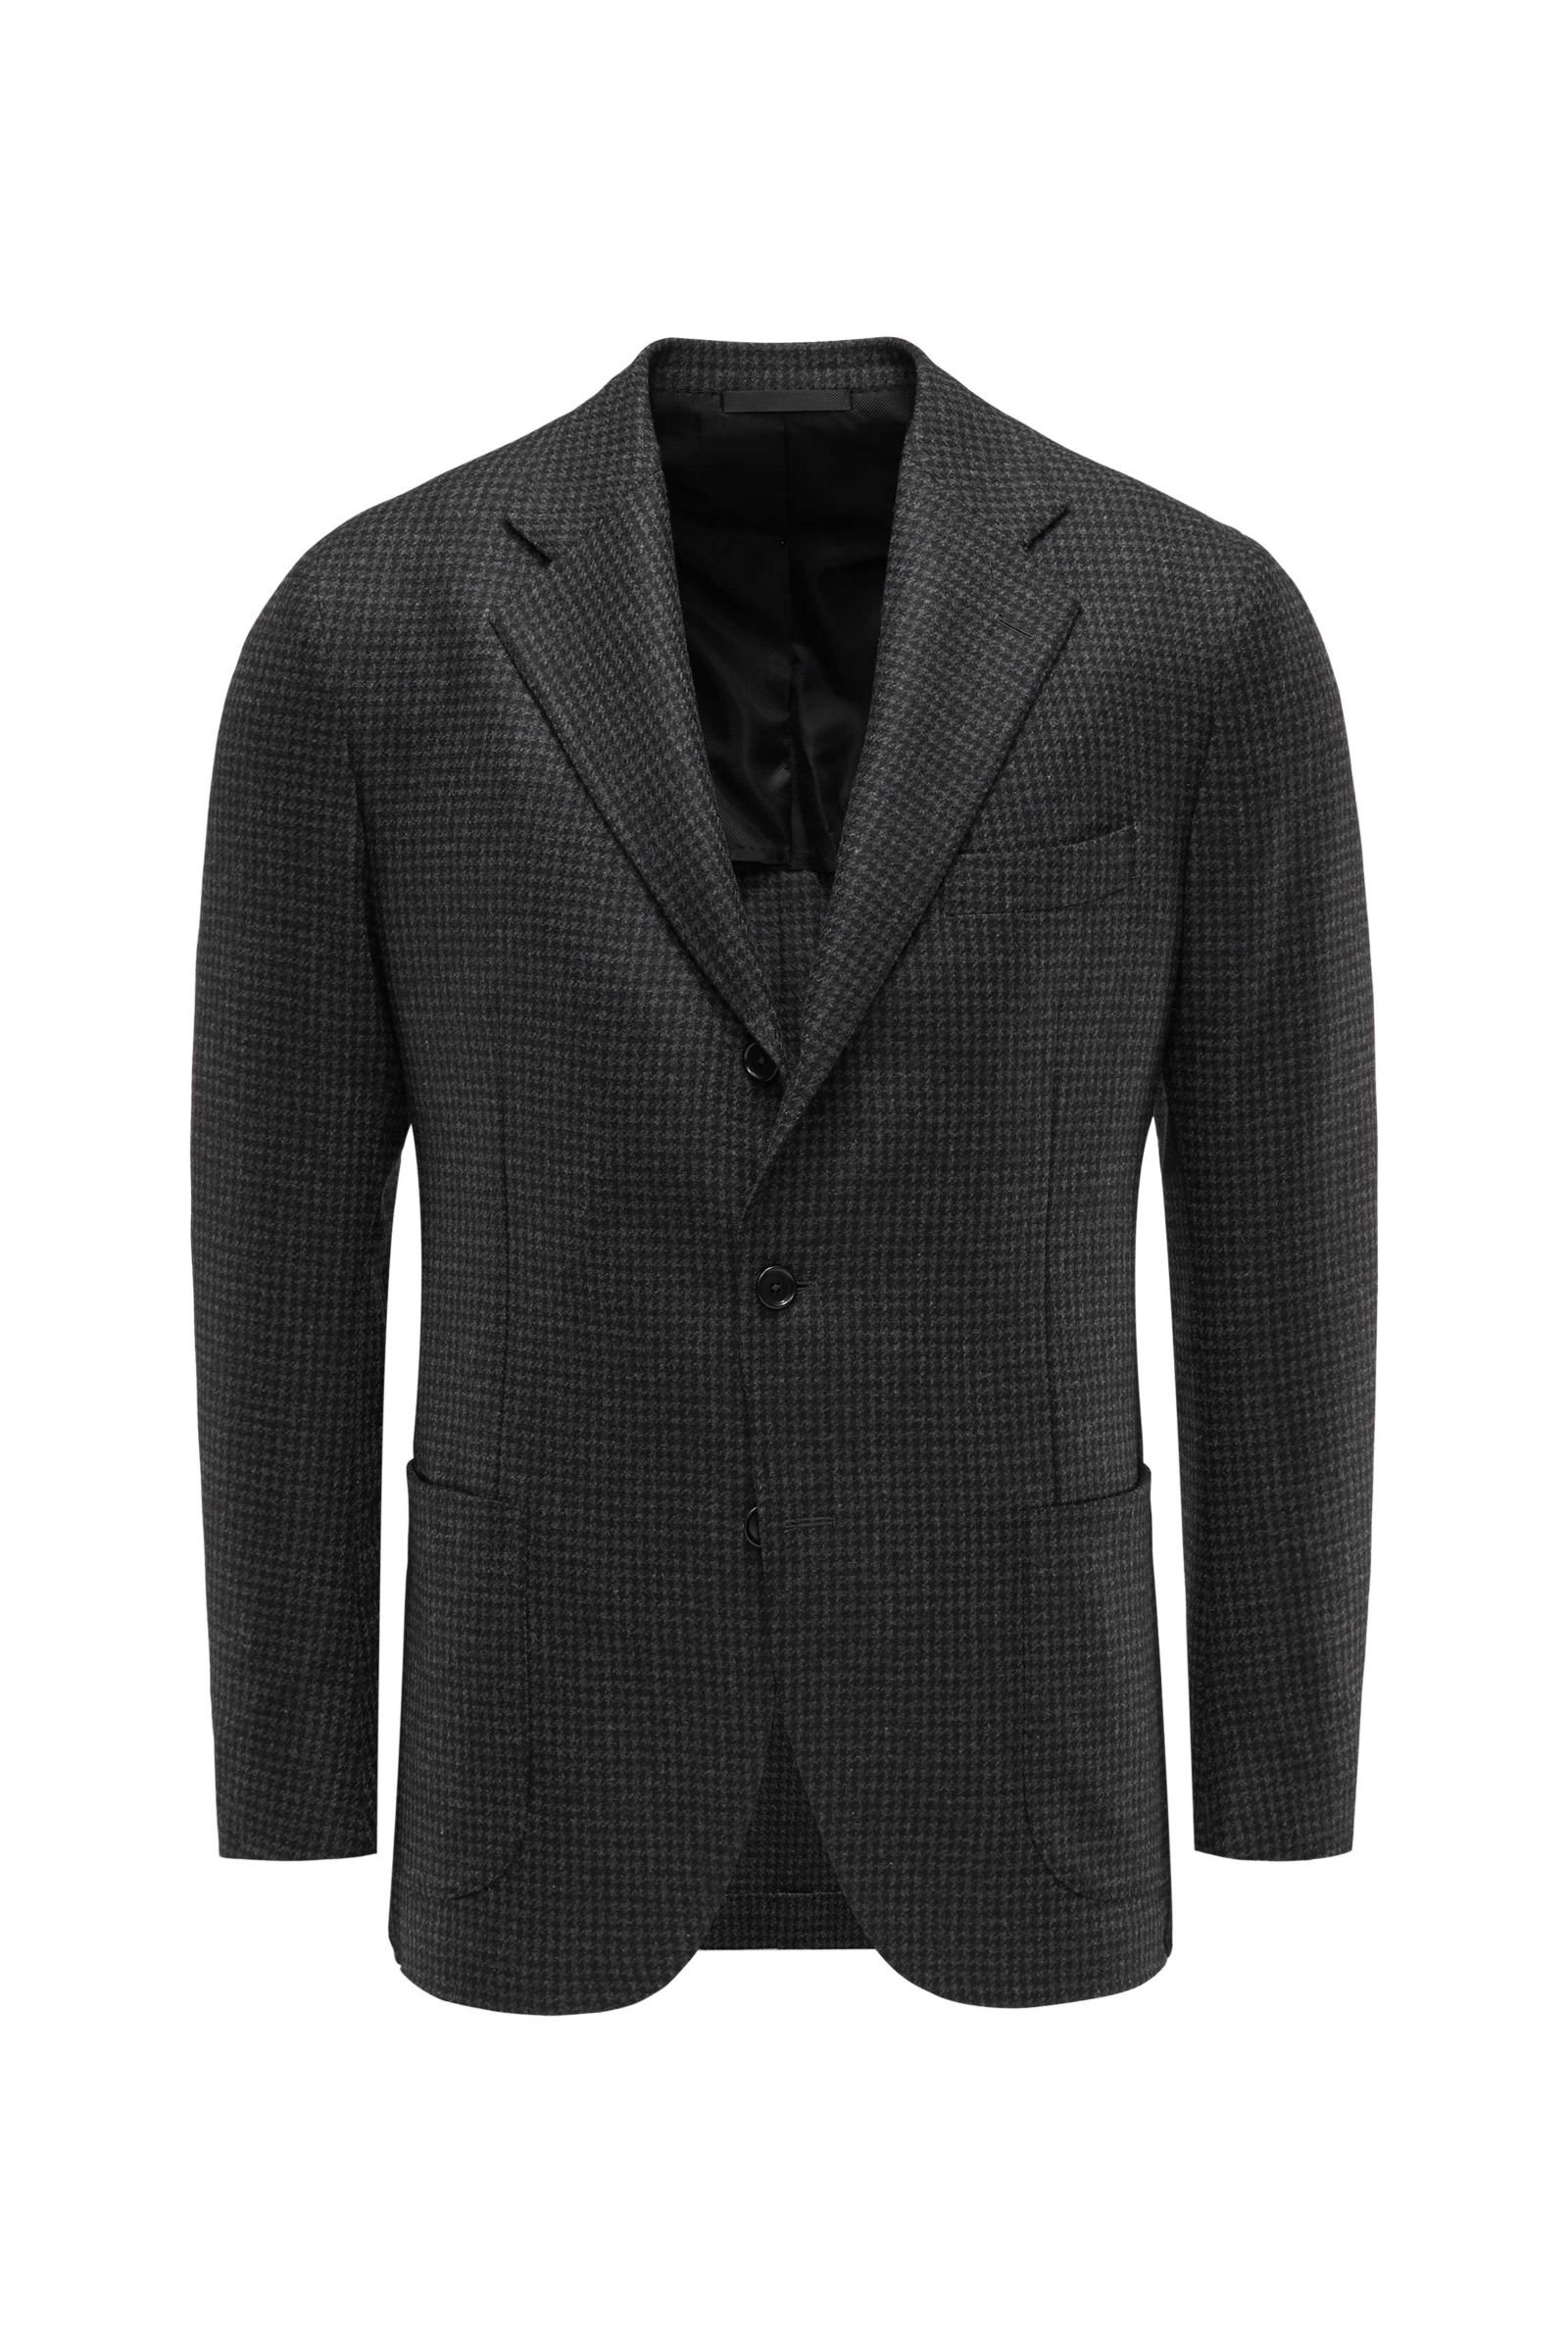 Smart-casual jacket 'Posillipo' anthracite checked